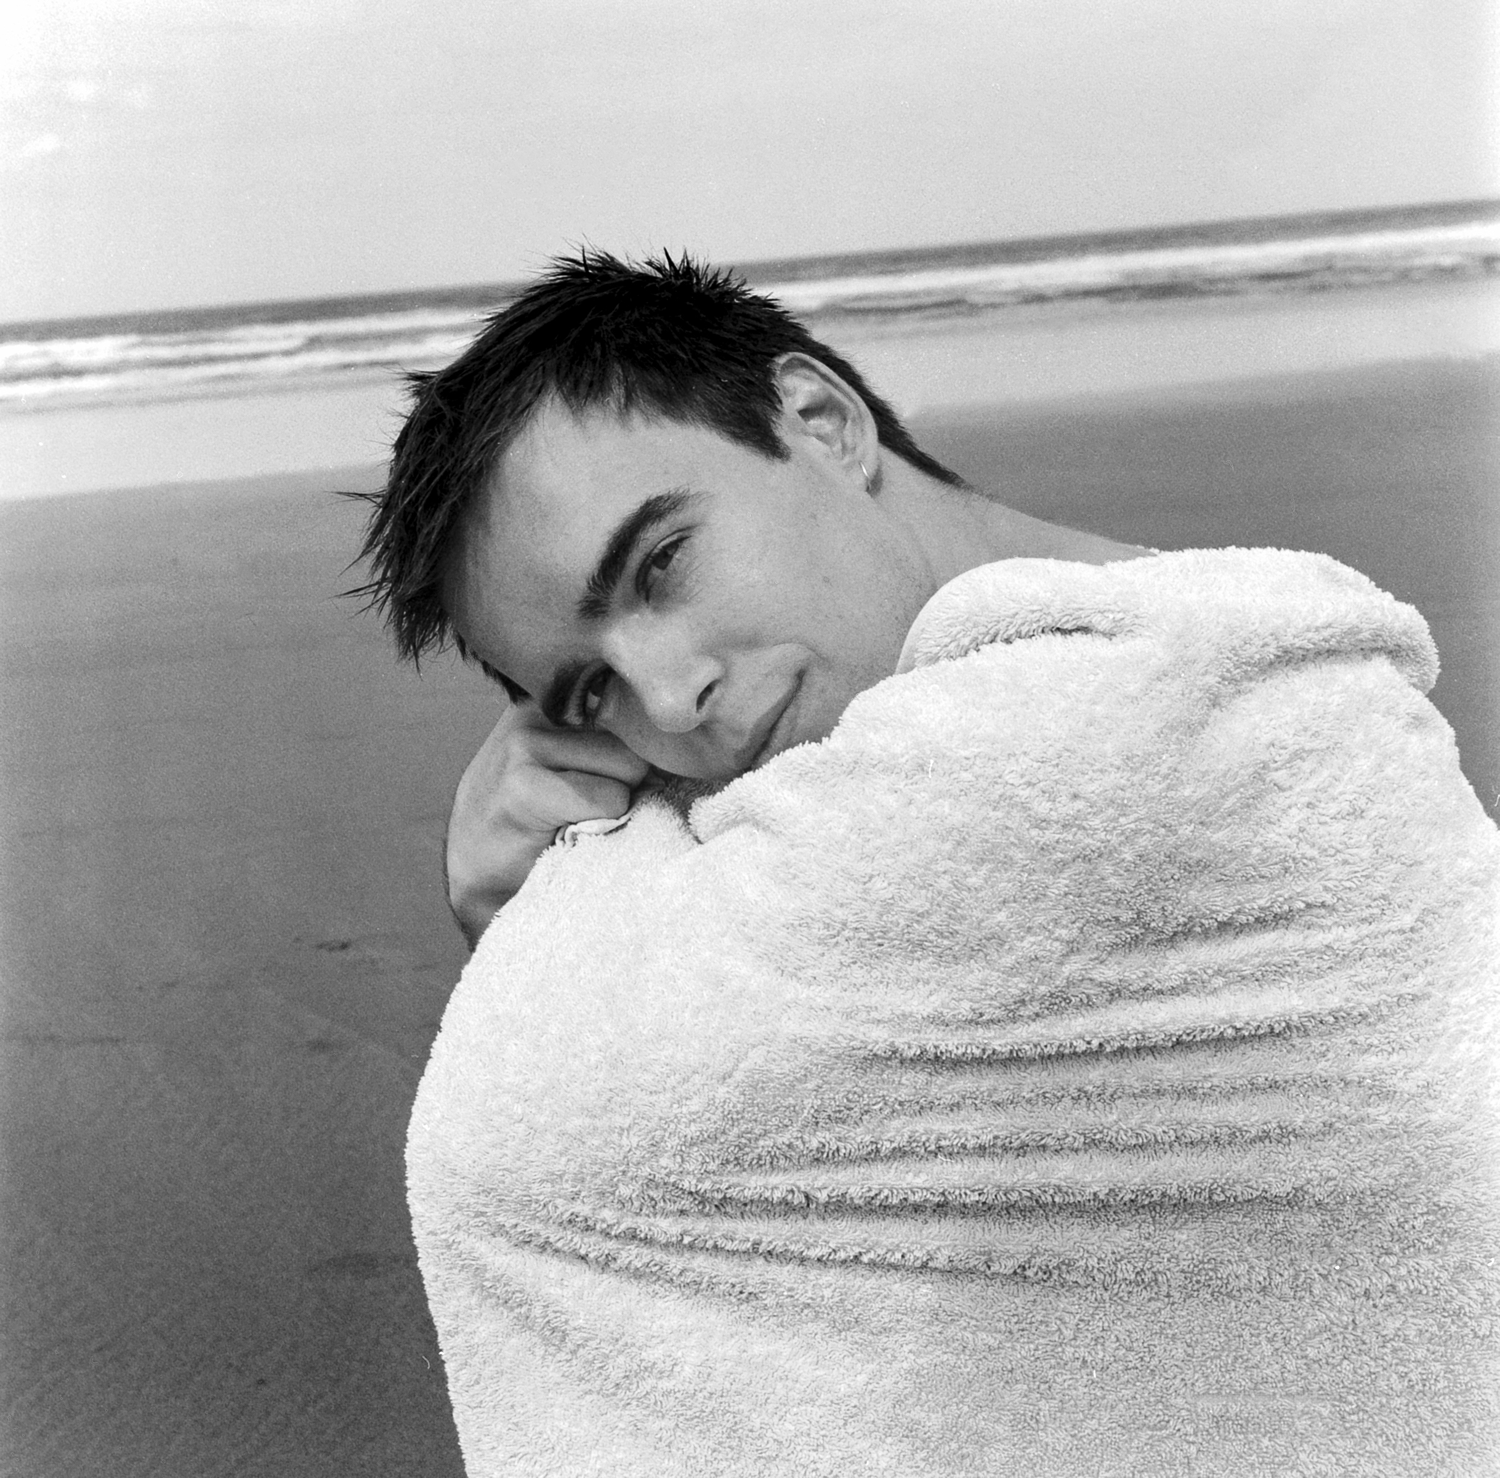 Black and white photograph depicting a portrait of a man wrapped in towel sitting on beach.